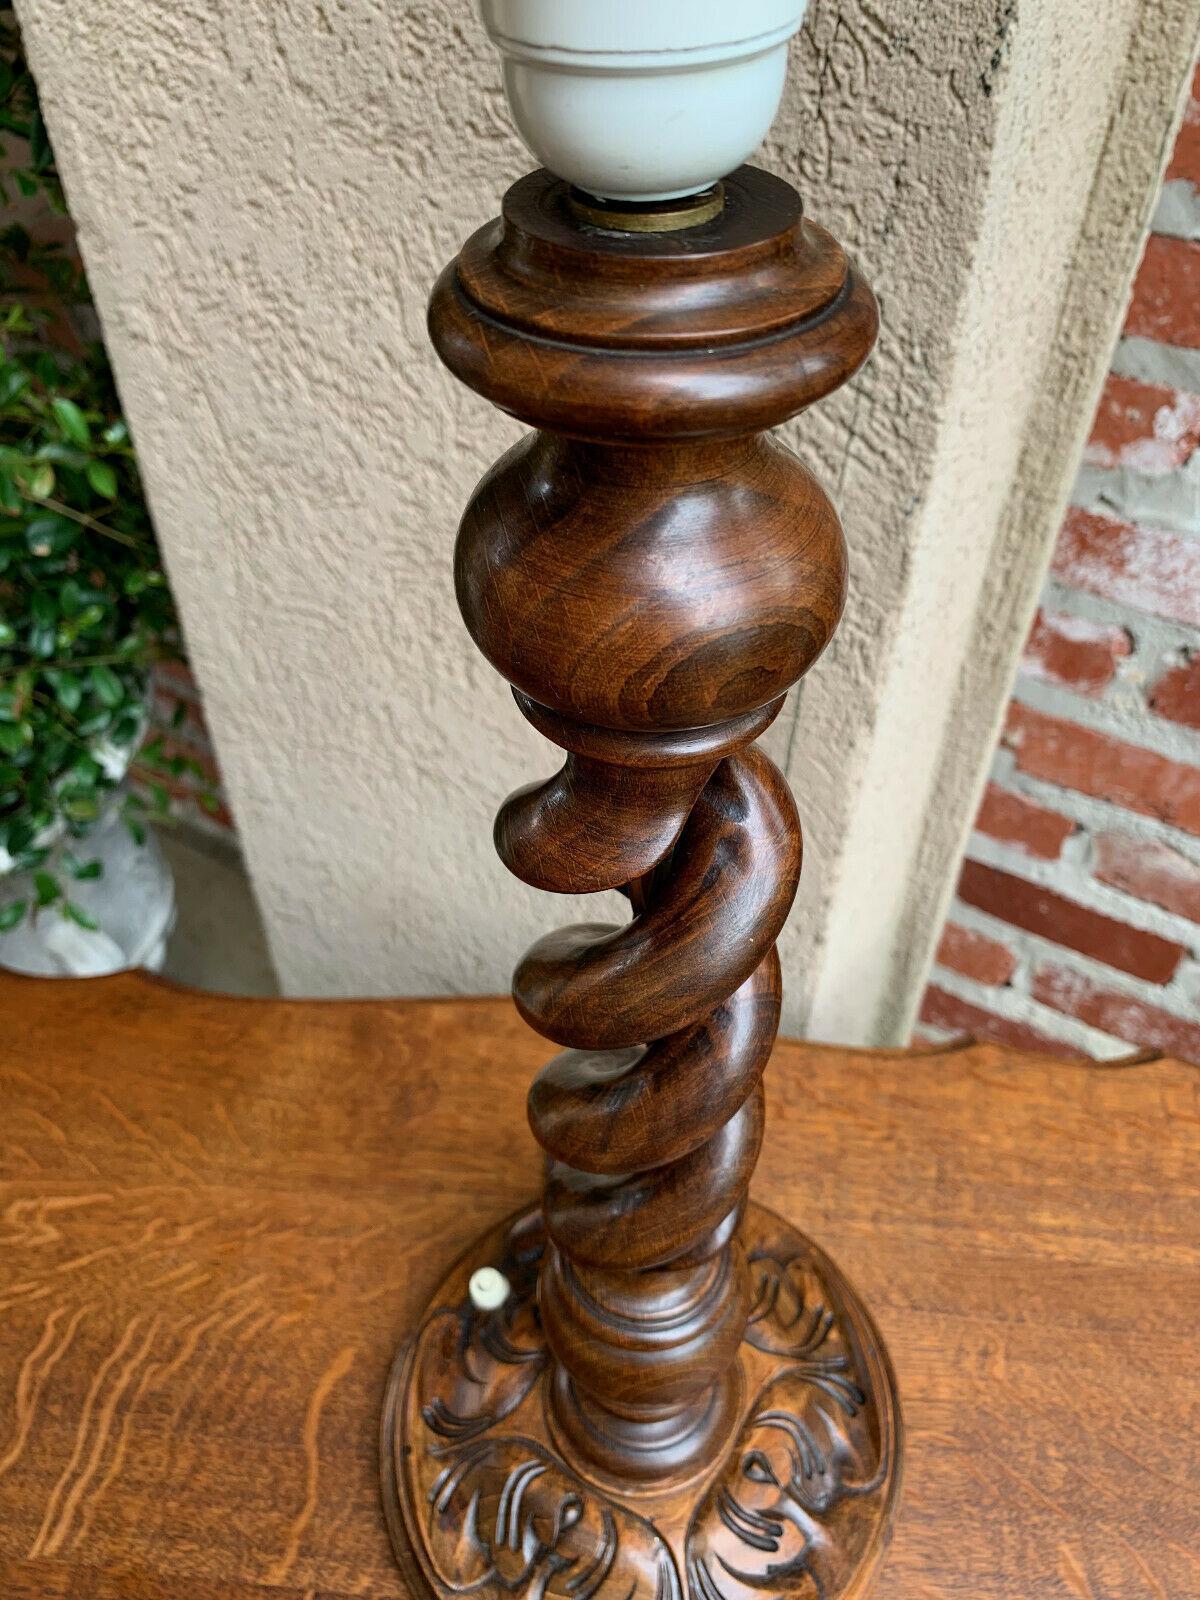 20th Century Vintage Antique English Carved Wood Open Barley Twist Desk Table Lamp Light